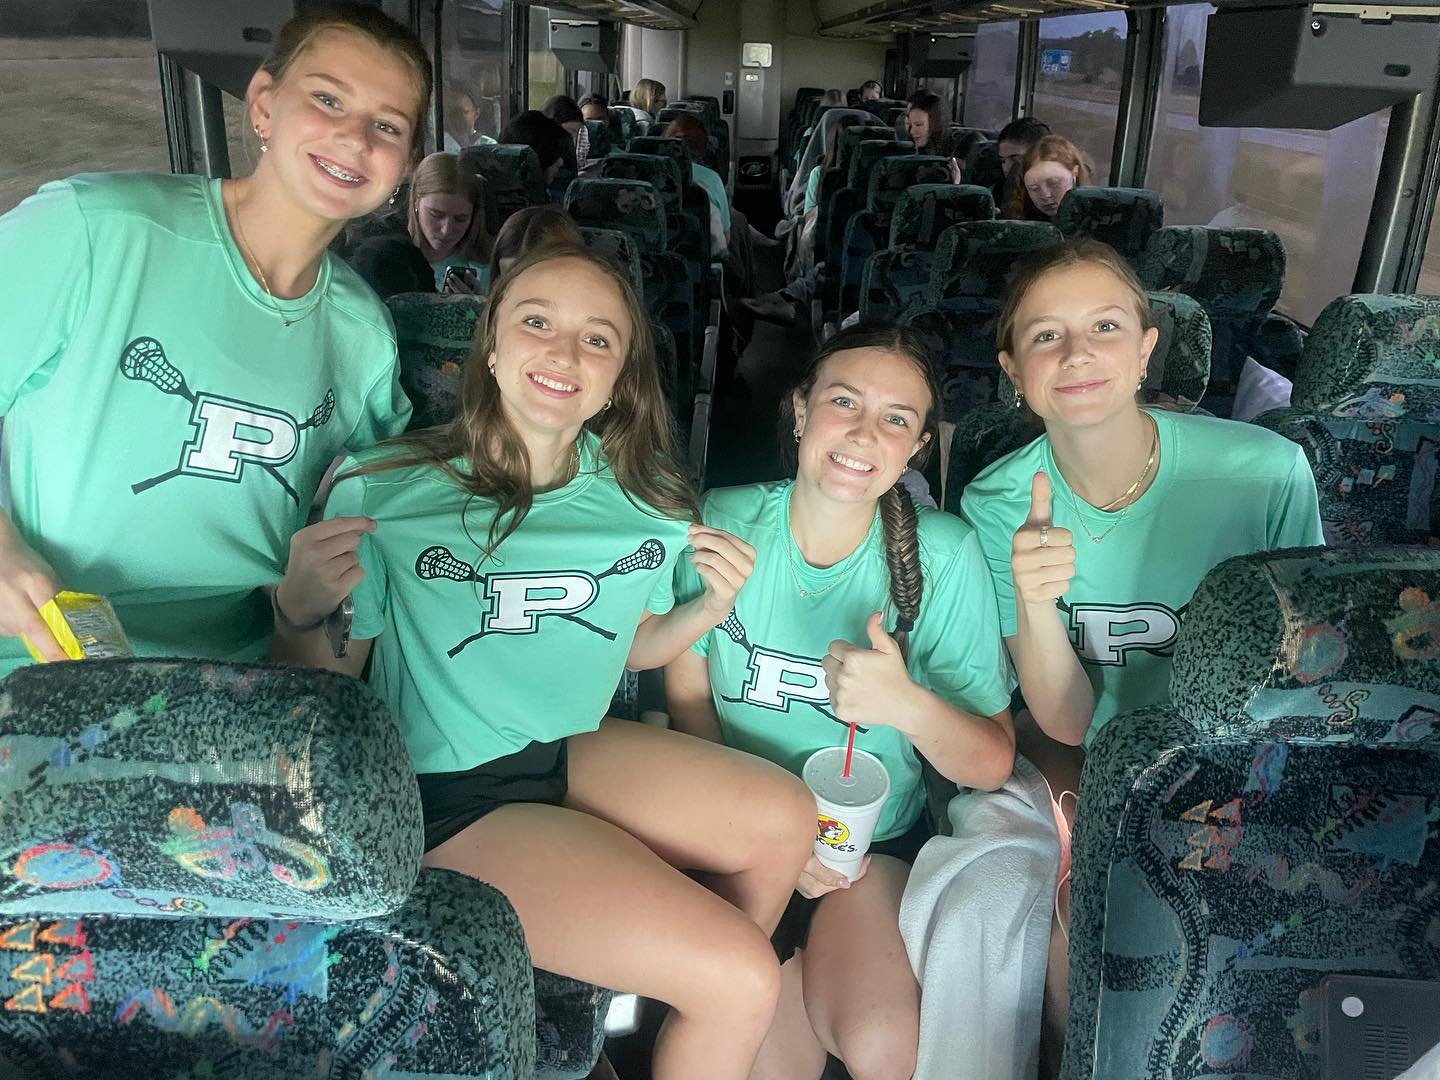 PROSPER LACROSSE OWNS SEAFOAM AND @bucees !!!!

Almost to houston and having fun 🤠🤠🤠🤠😎😎😎😎

We are ready to compete